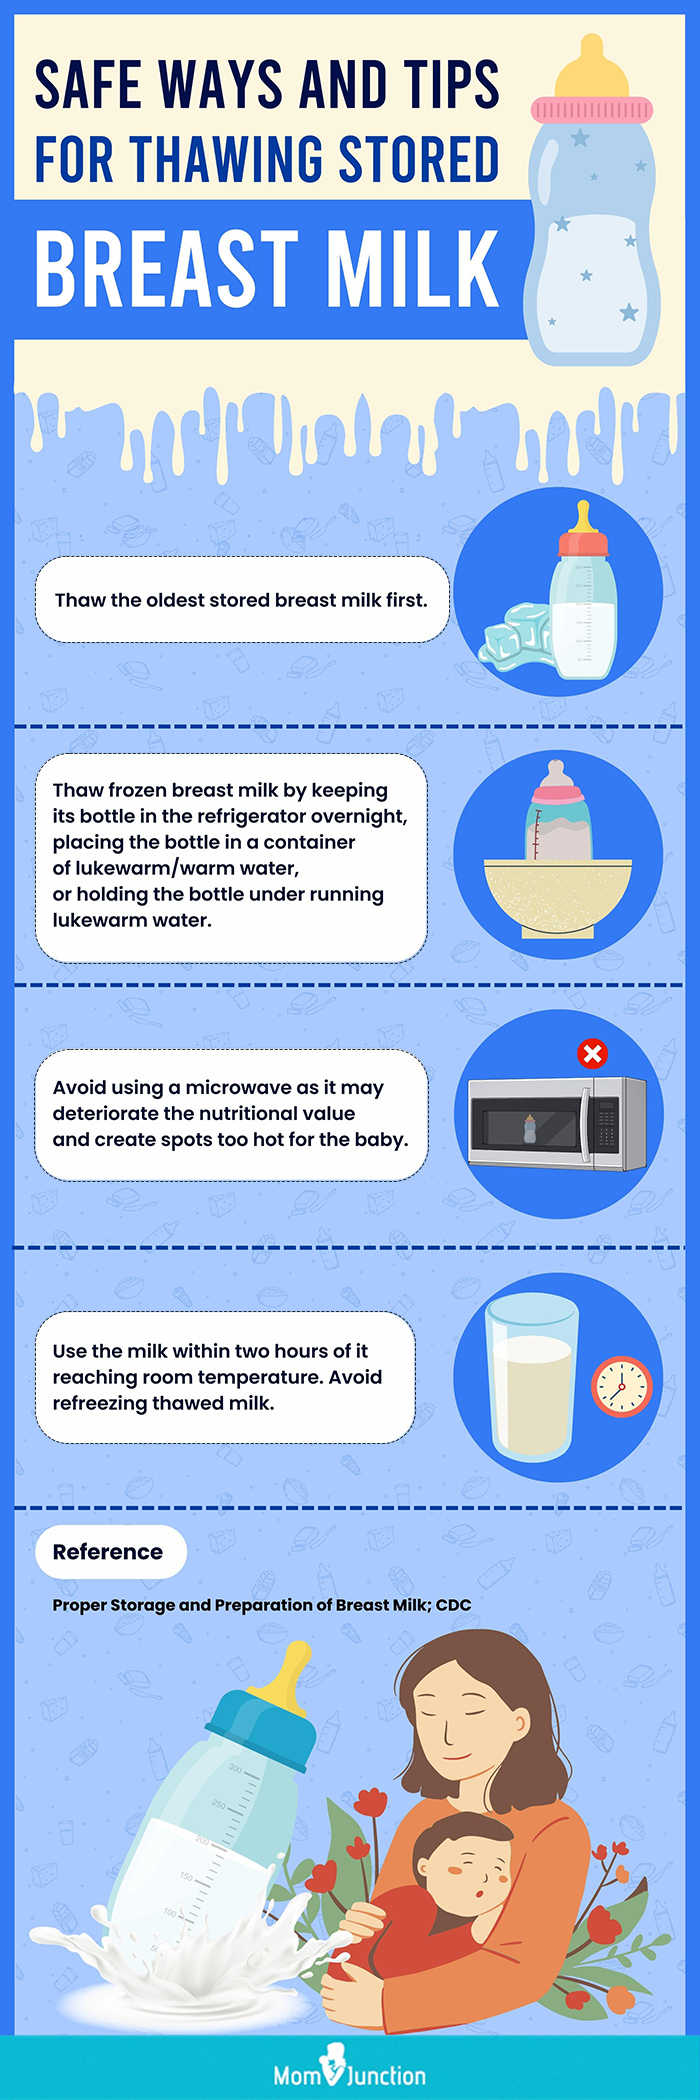 safe ways and tips for thawing stored breast milk (infographic)